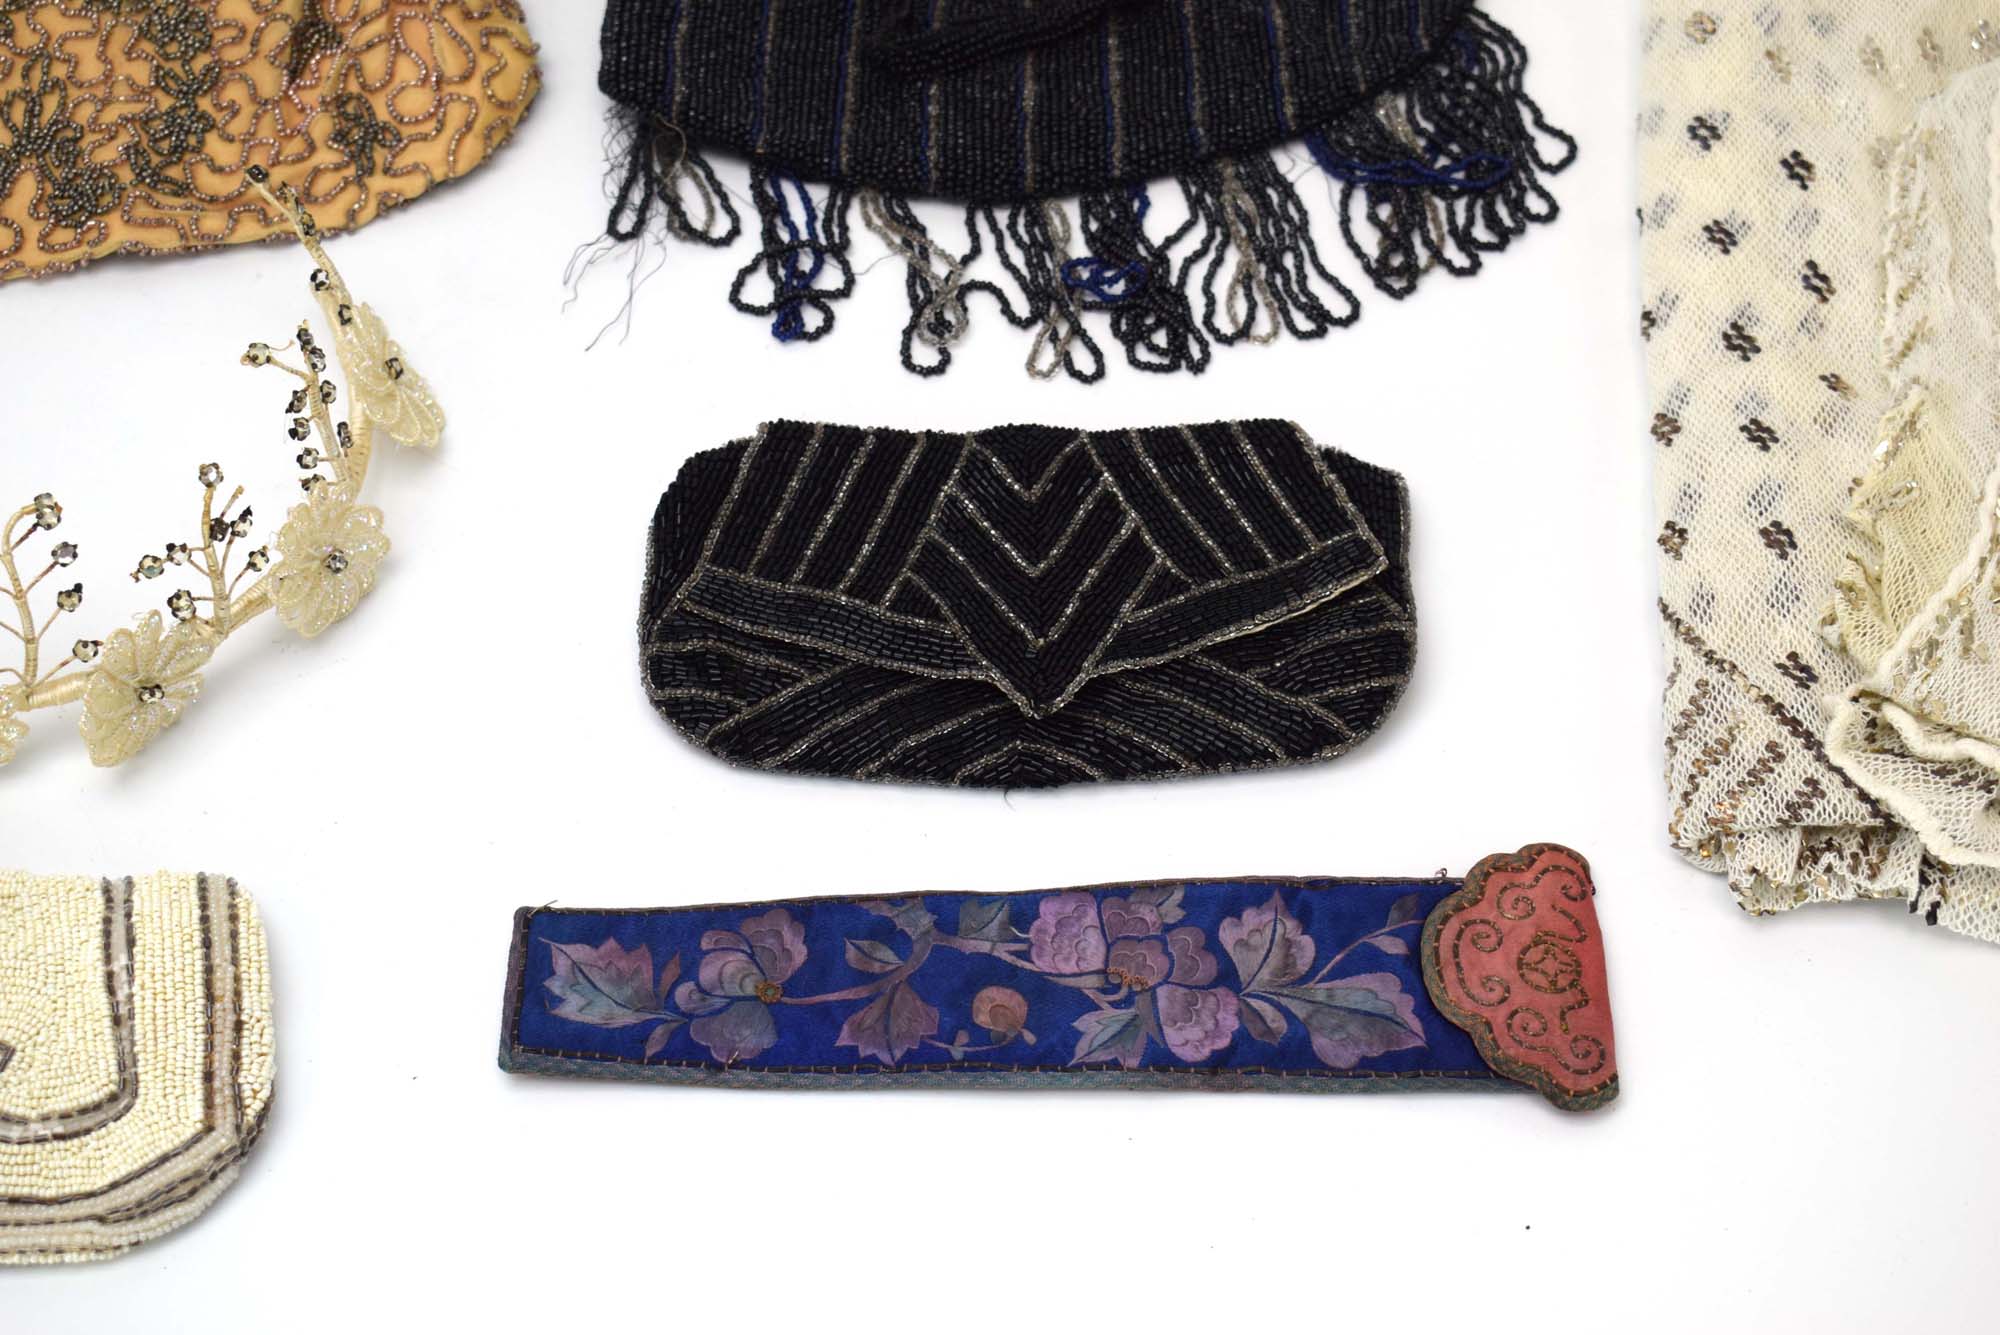 A group of textiles including an embroidered clutch bag with glass roundels, - Image 5 of 14